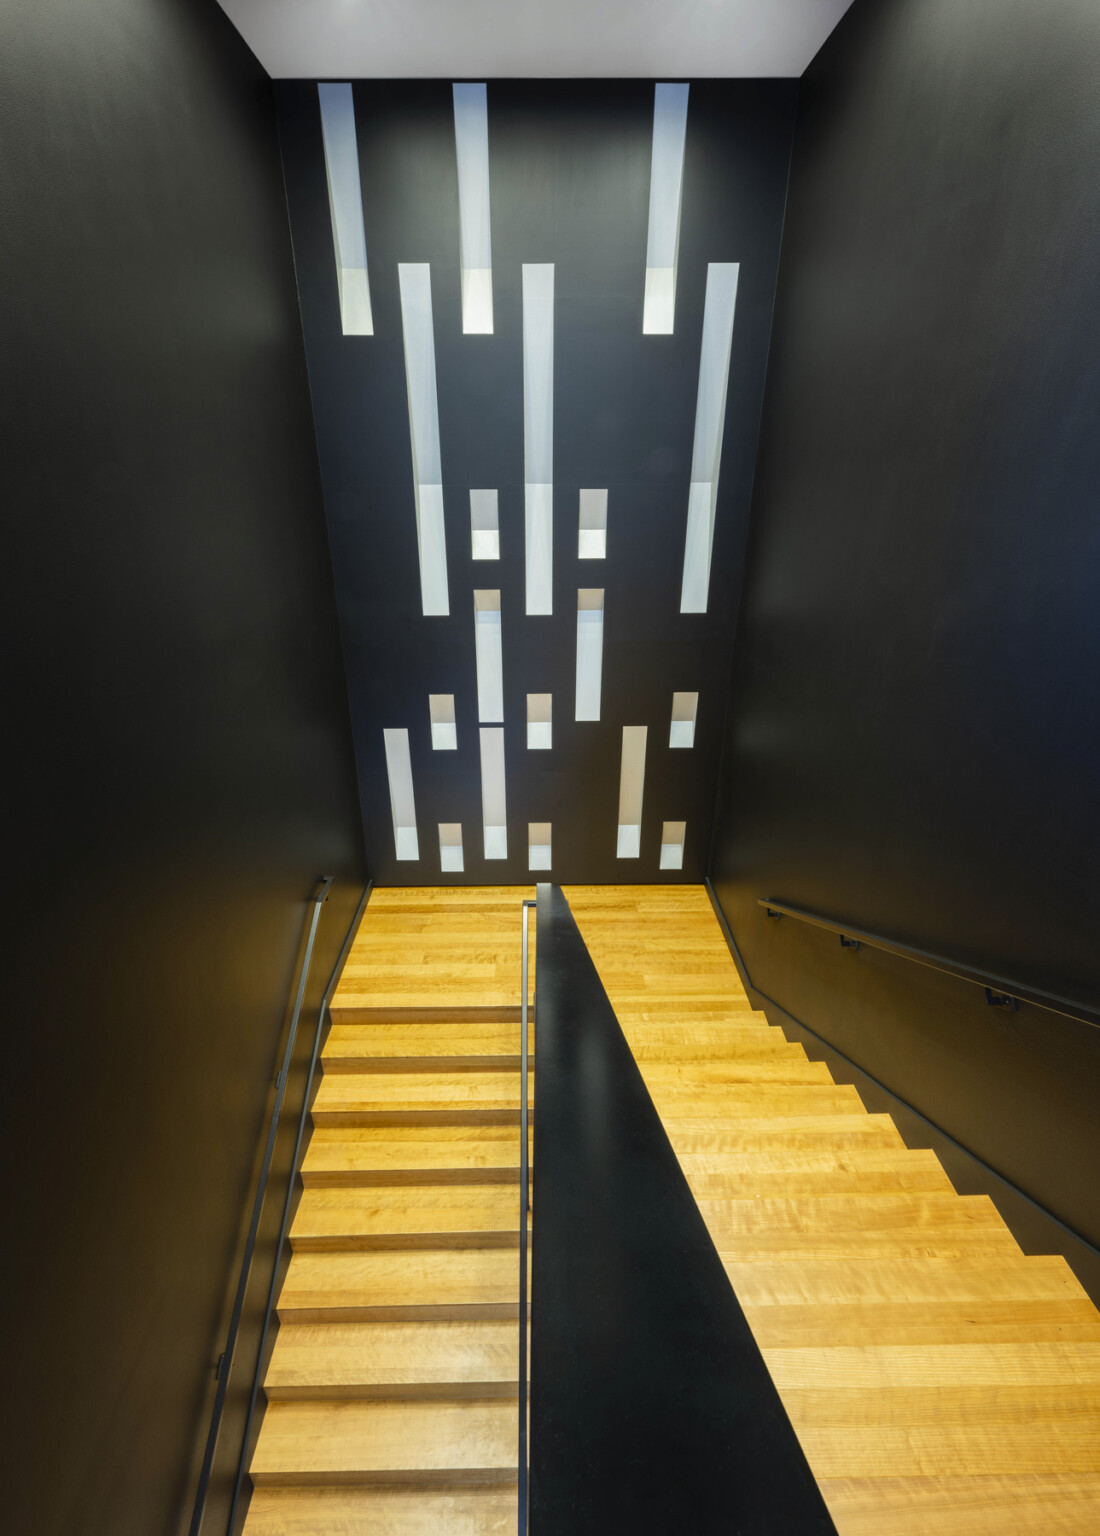 Interior yellow wood steps in black stairwell with pattern of long tin windows